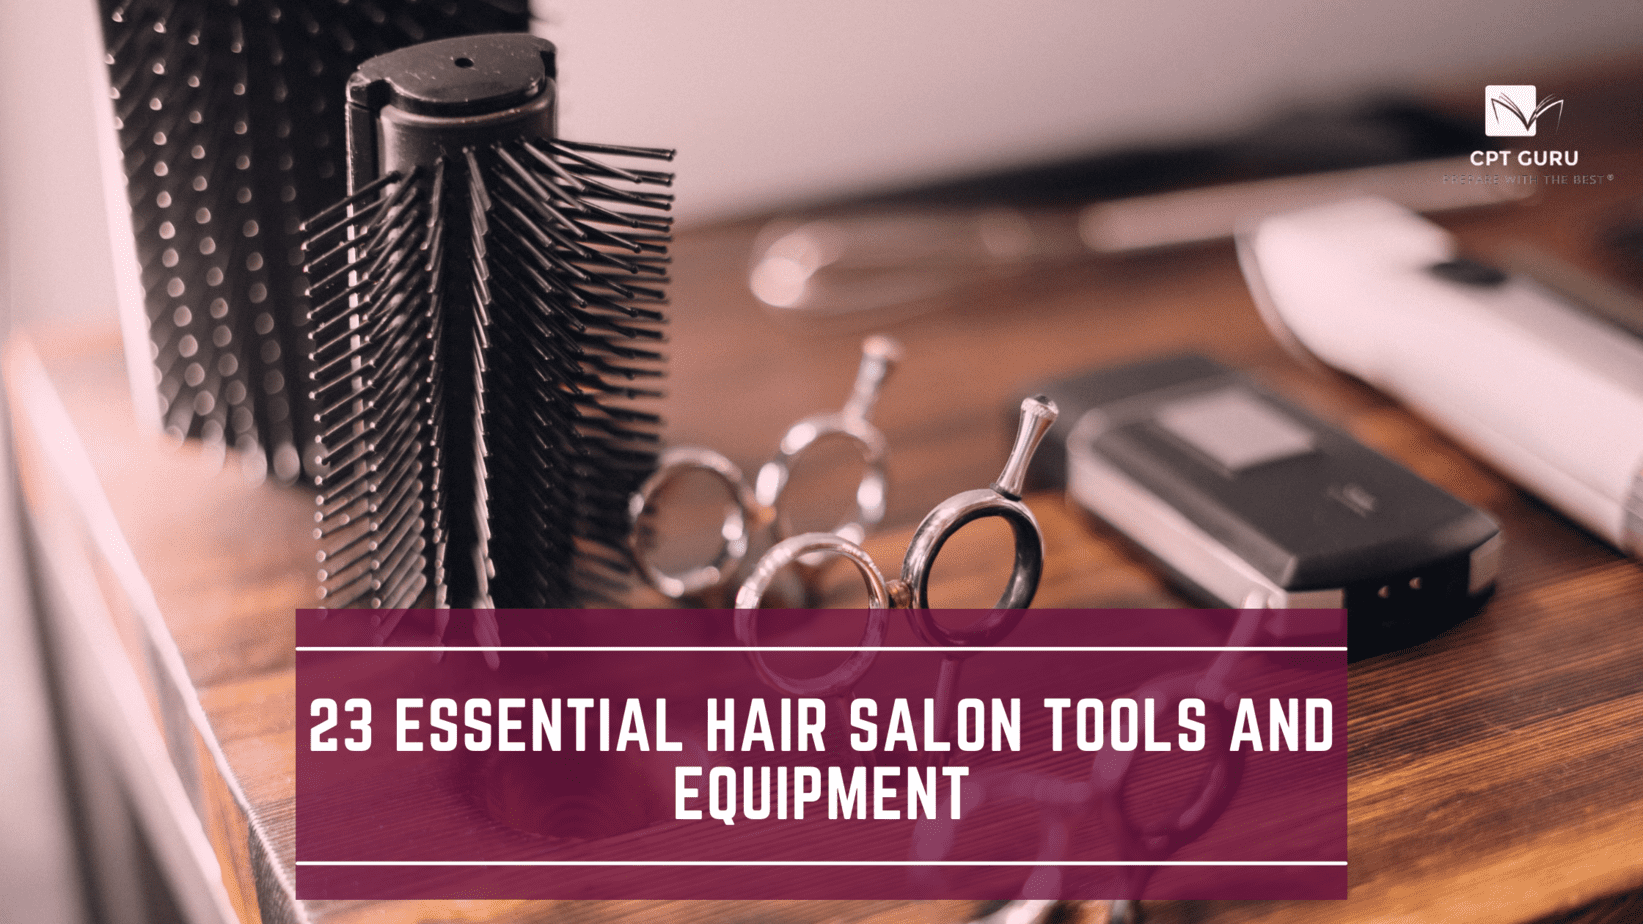 Essential hair salon tools and equipment